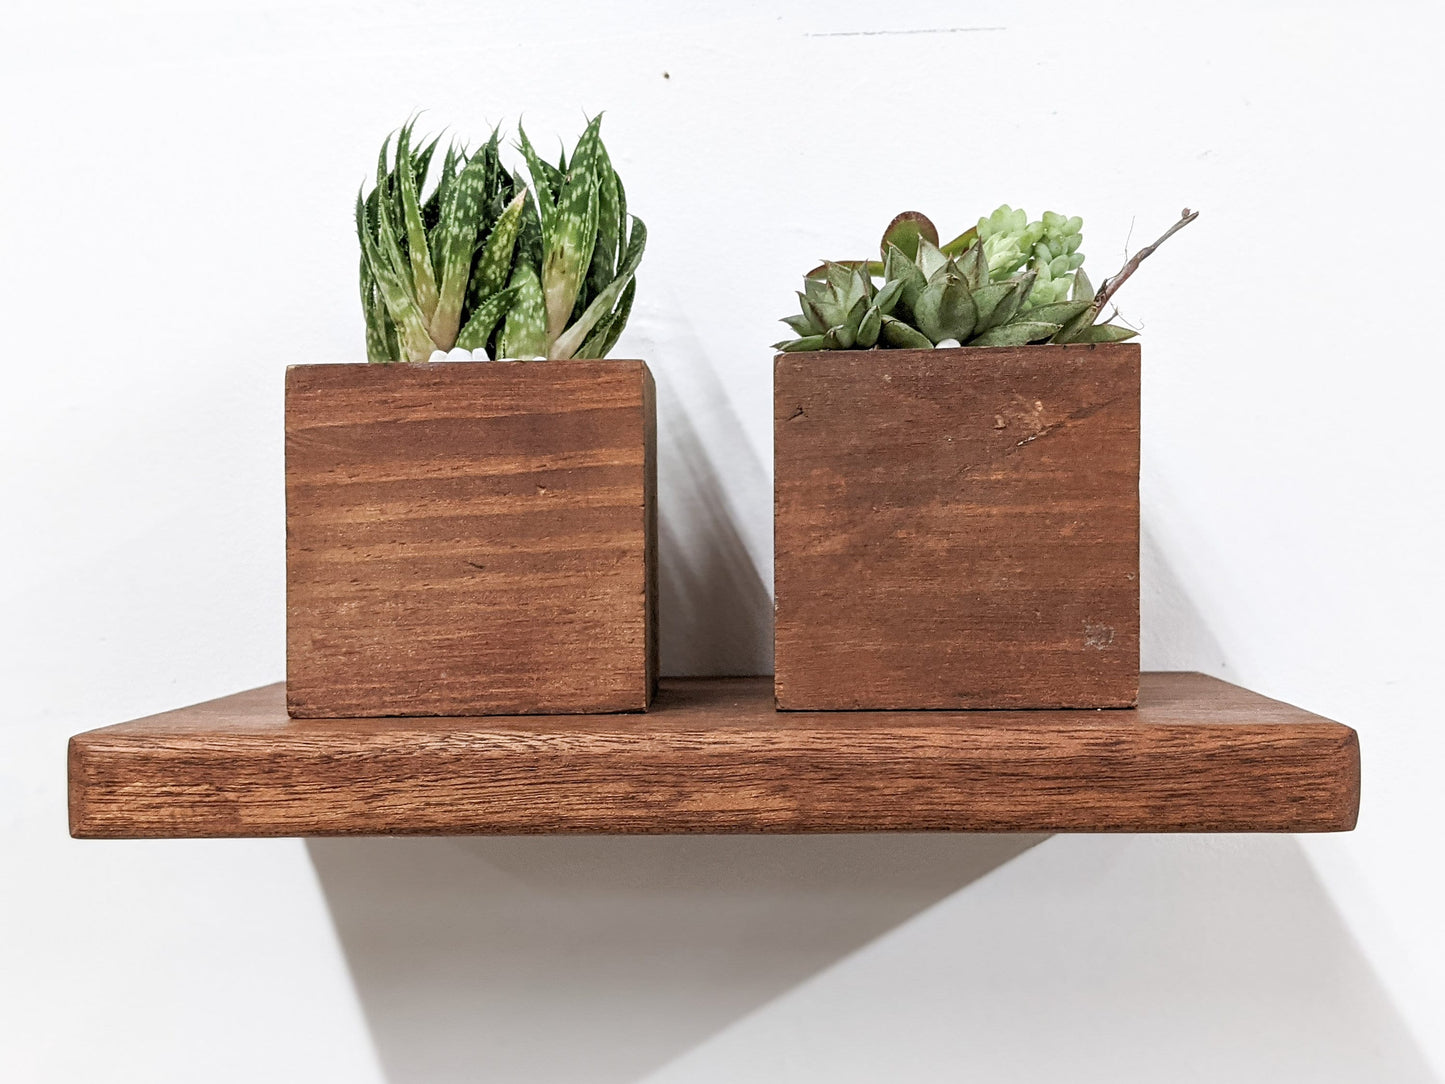 A small oak floating shelf displays two small green succulents, both sitting within wooden square planters.